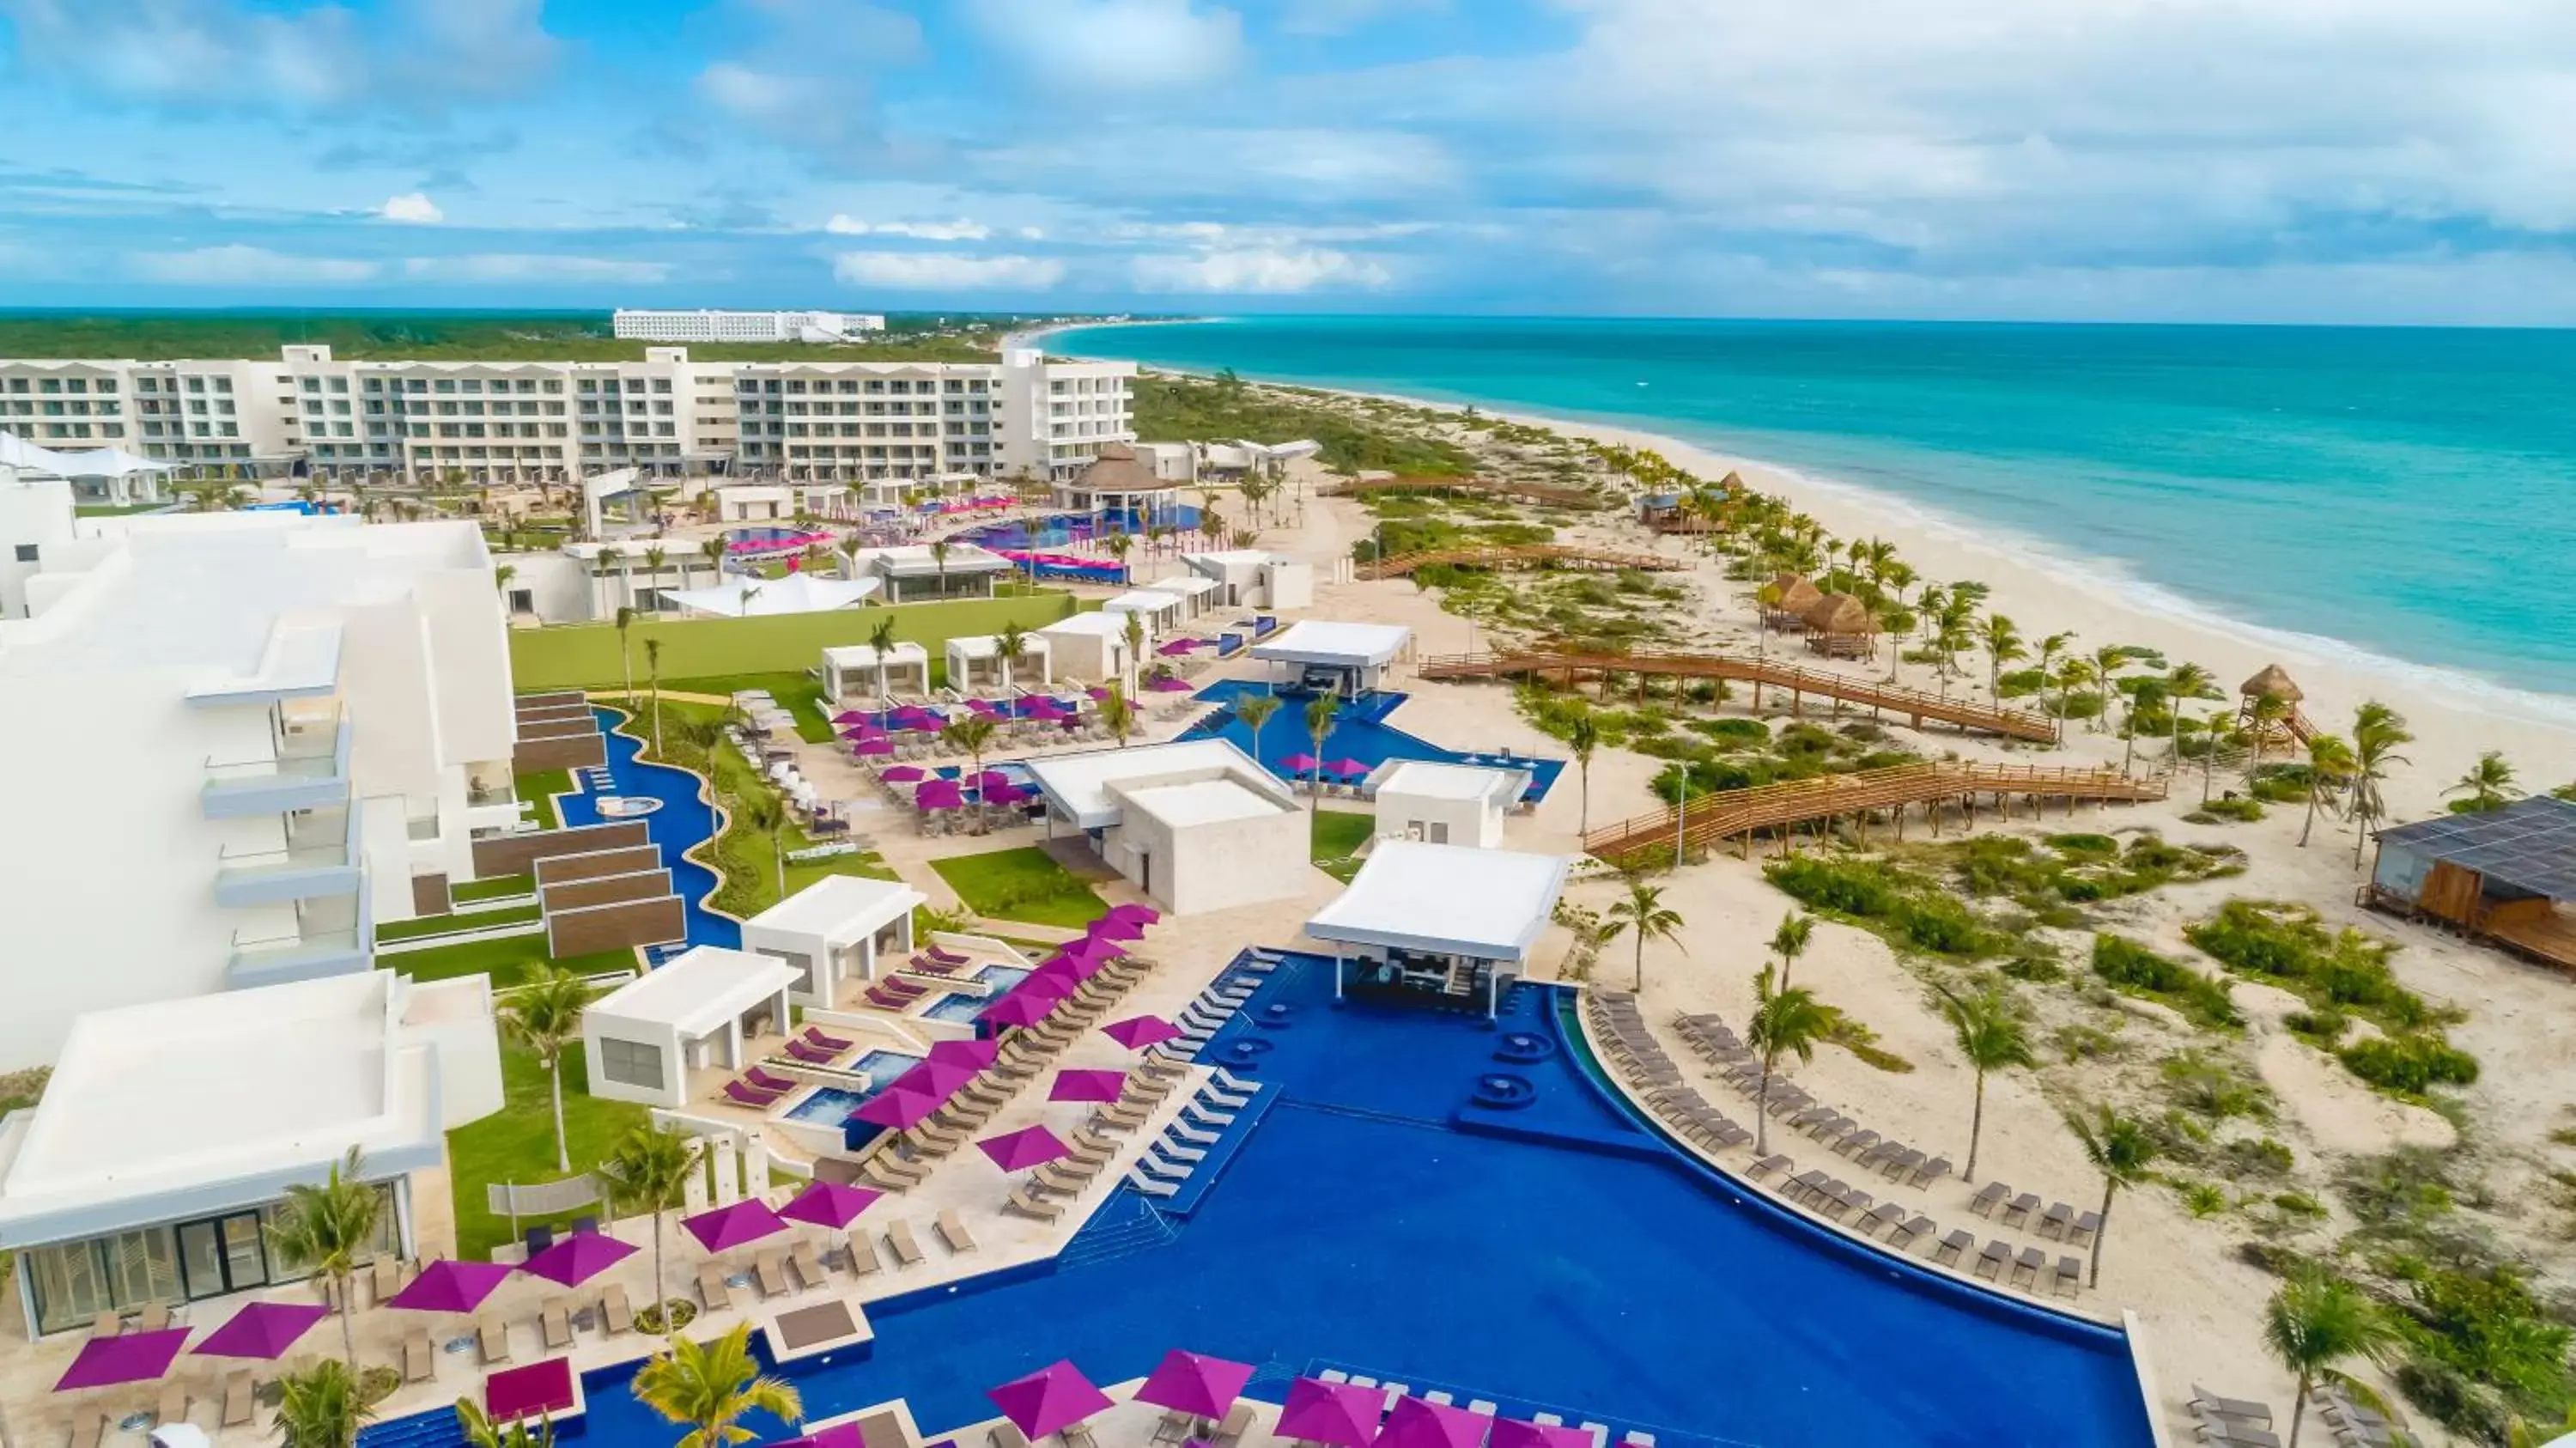 Bird's eye view in Planet Hollywood Cancun, An Autograph Collection All-Inclusive Resort